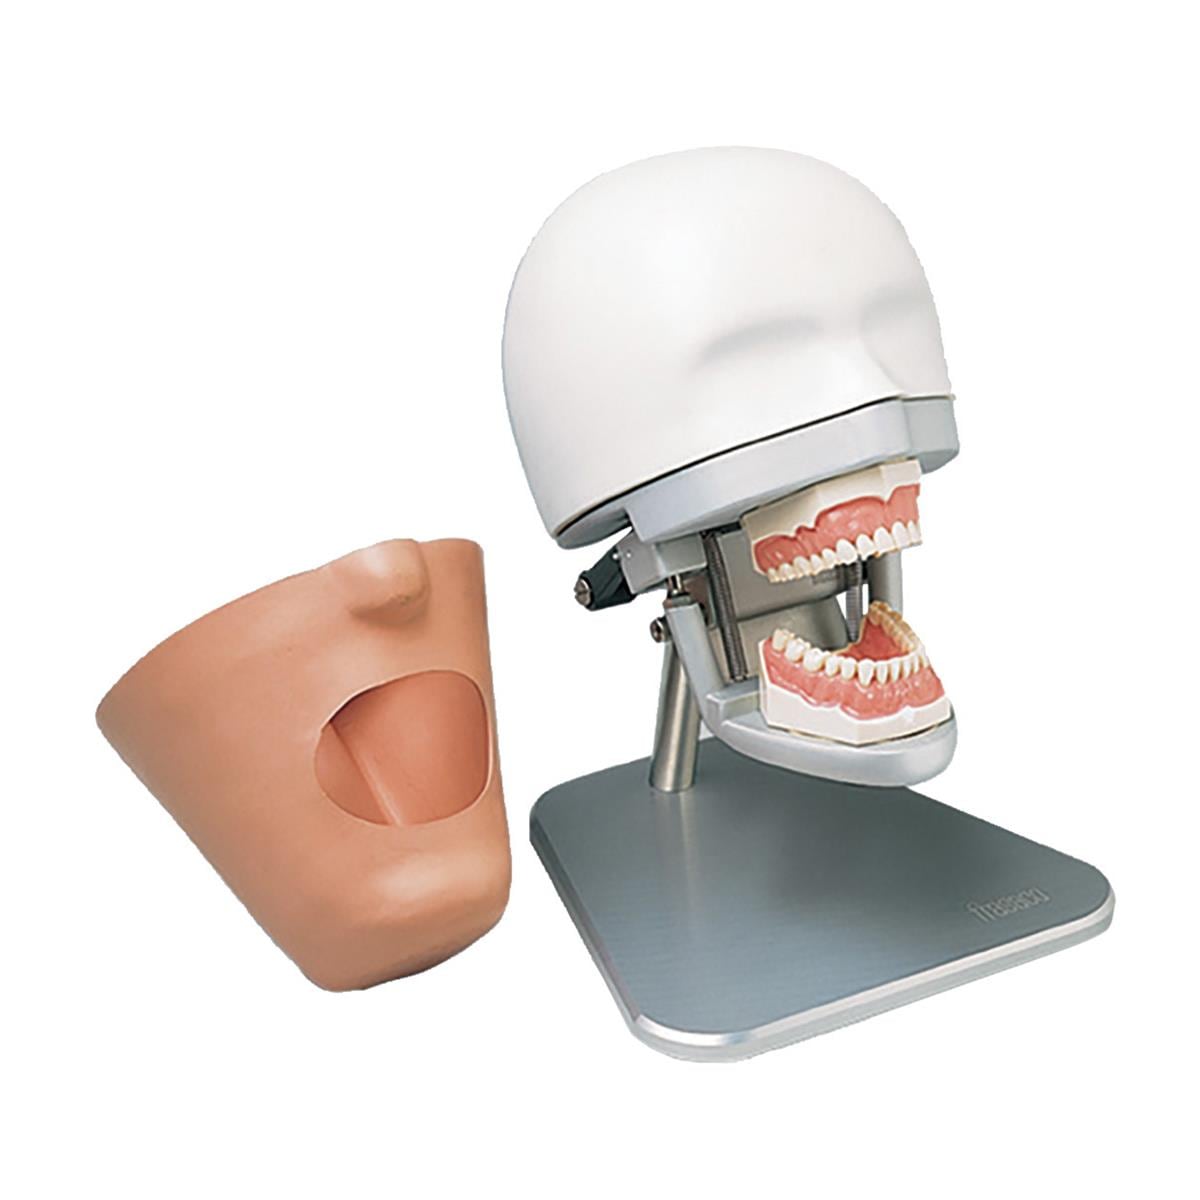 Dental Exercise Unit complete with Phantom Head P-